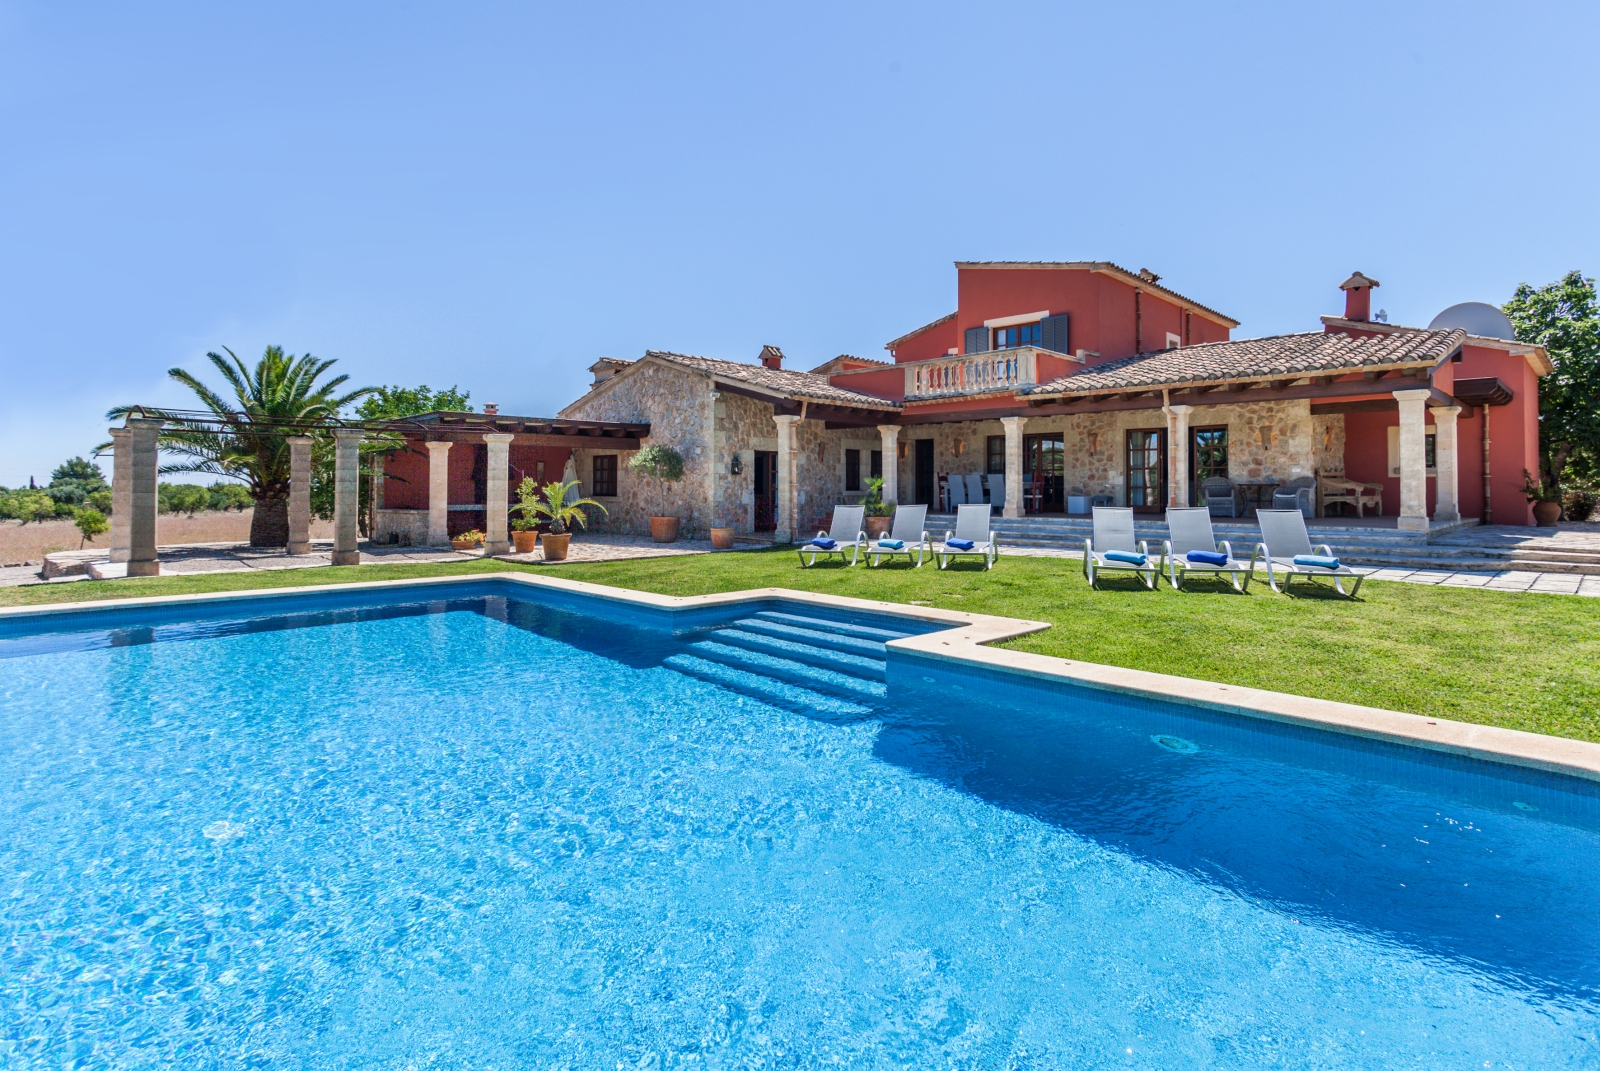 Pool with sun loungers and view of back of villa and garden at Can Suelo in Mallorca, Spain